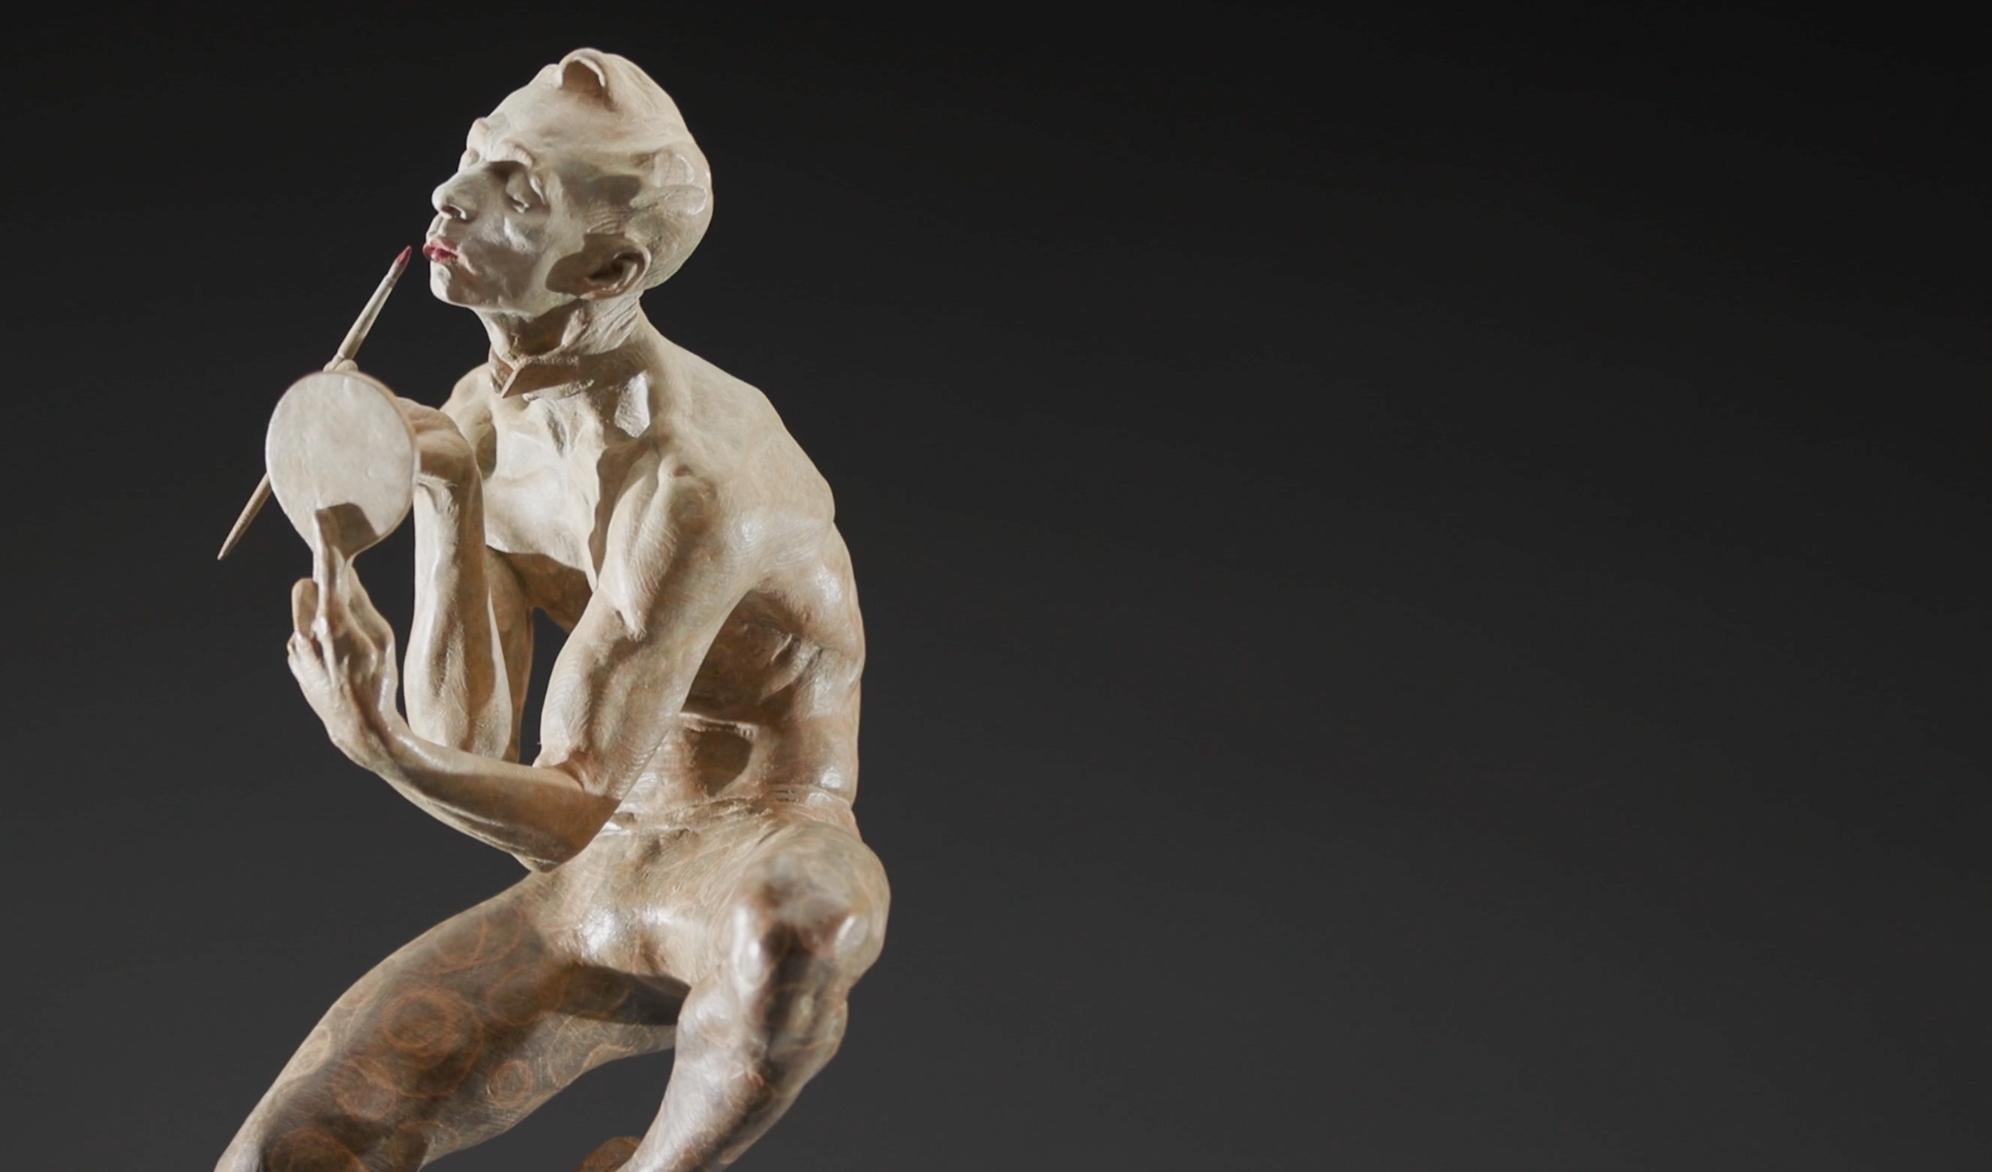 “A silent medium within a silent medium.” These are the words contemporary master Richard MacDonald uses in describing his world renowned Mime Series. MacDonald’s trademark skill at investing his evocative bronze images with movement and life is